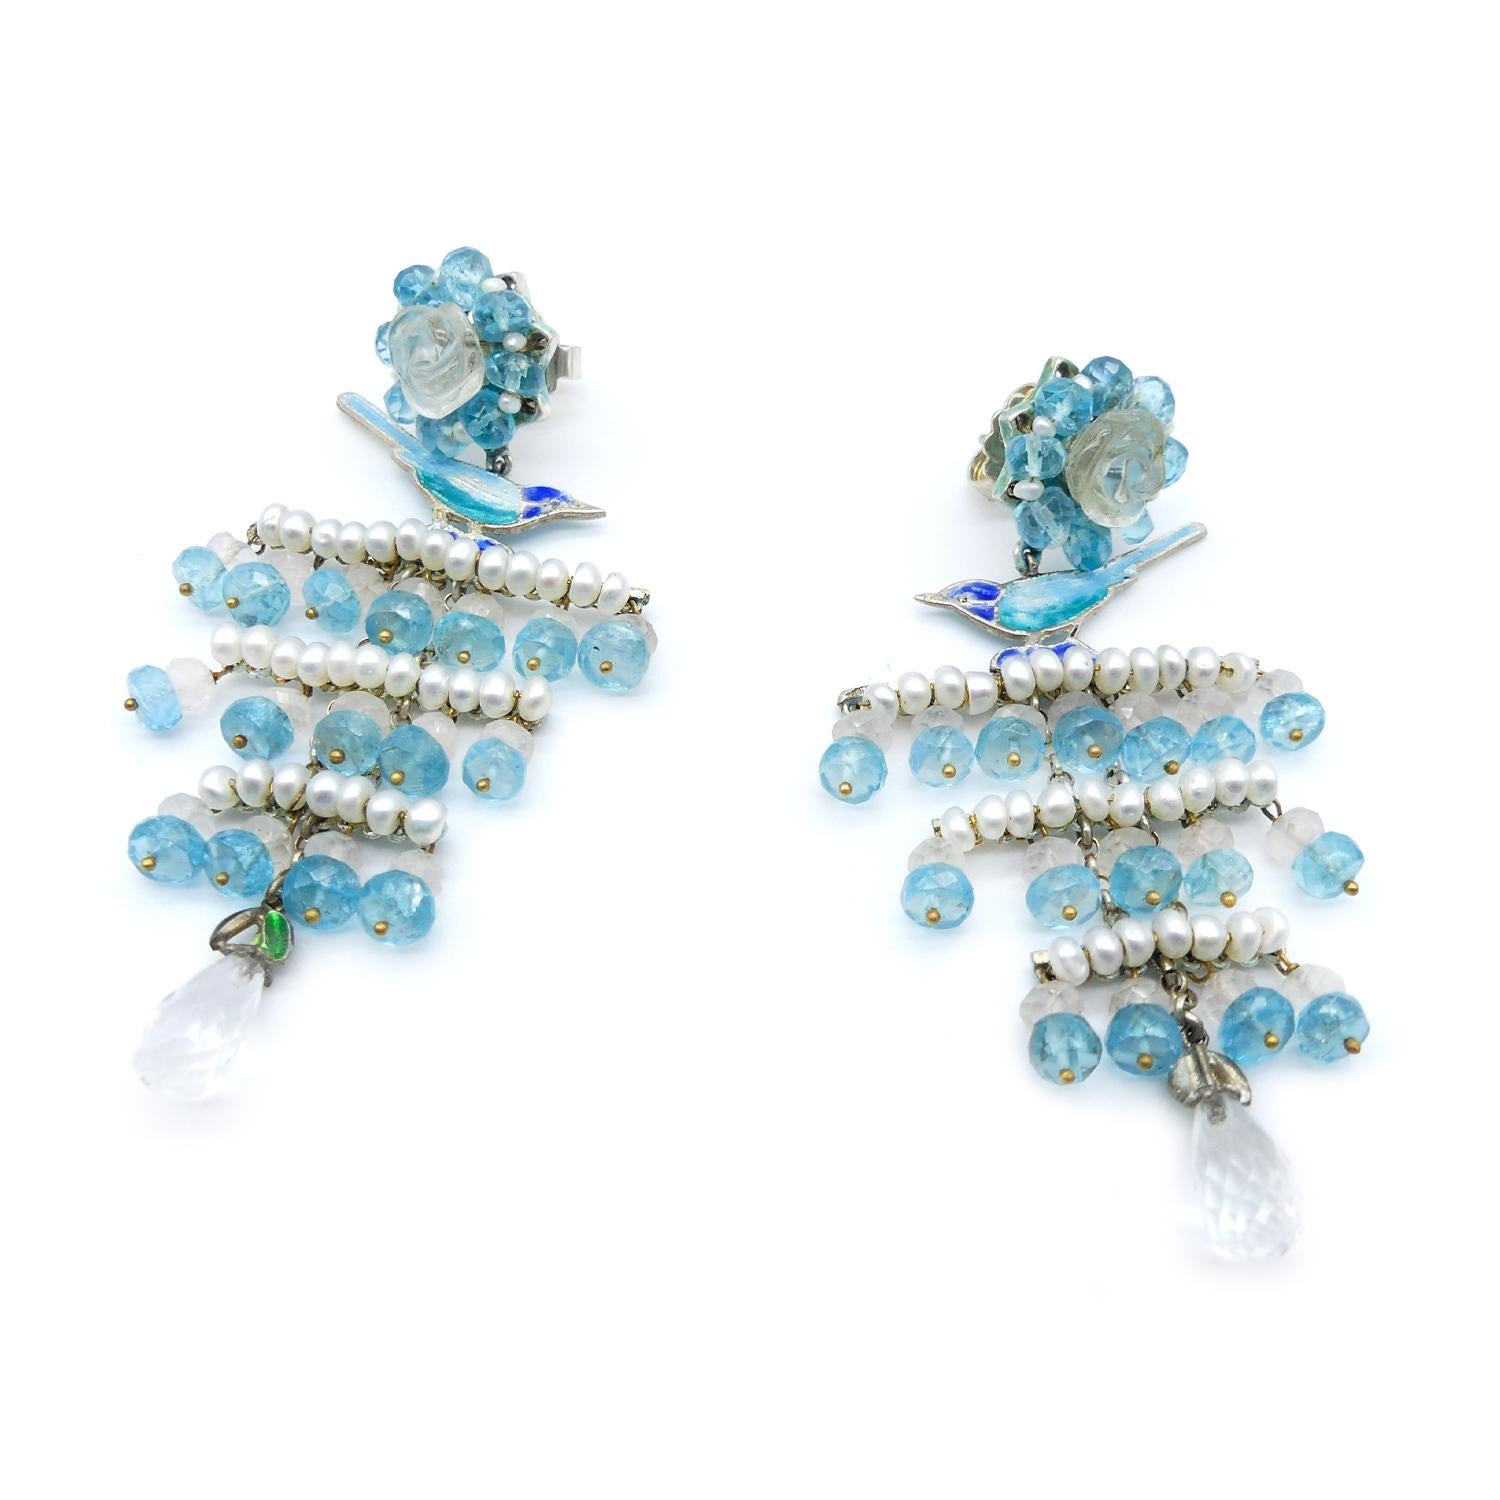 Pearls Apatites Quartz Roses Traditional Silver Enameled Earrings Vicente Gracia

Earrings from the series of the Nightingale Gardens.
This piece is based on the stylistic core of the Silk Road which are the balconies and the birds enameled on fire.